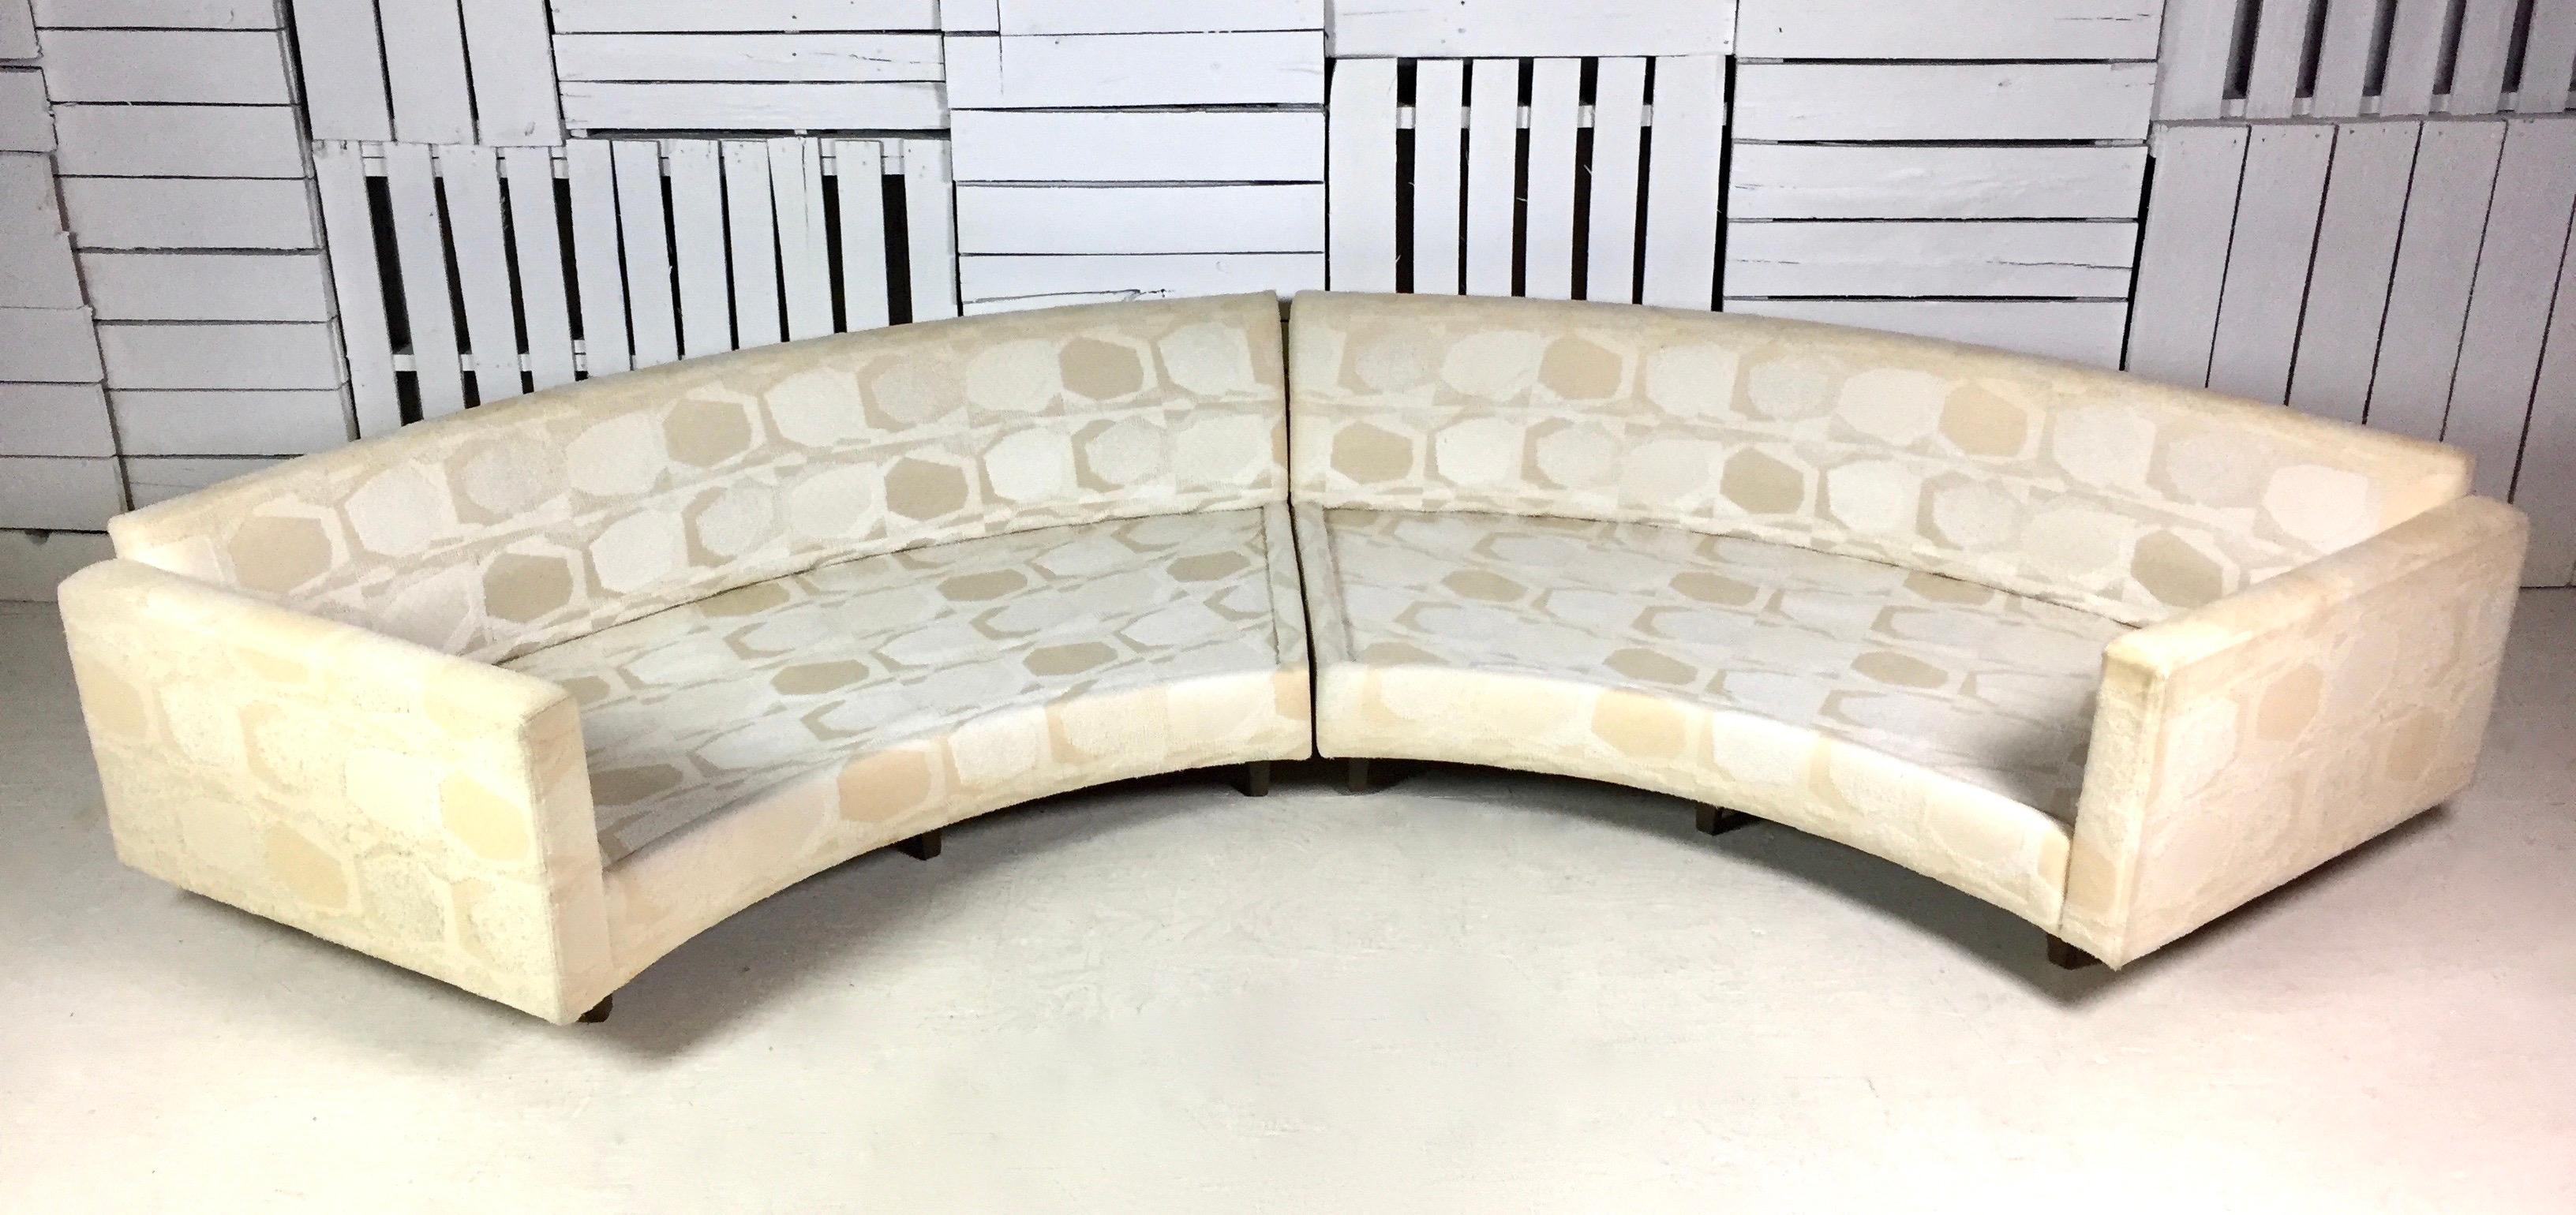 Authentic Adrian Pearsall sectionals are some of his most dramatic creations. They also need space! Please peruse our growing collection of rare Pearsall pieces which we will be listing this month.

Adrian Pearsall semi-circular sectional sofa by